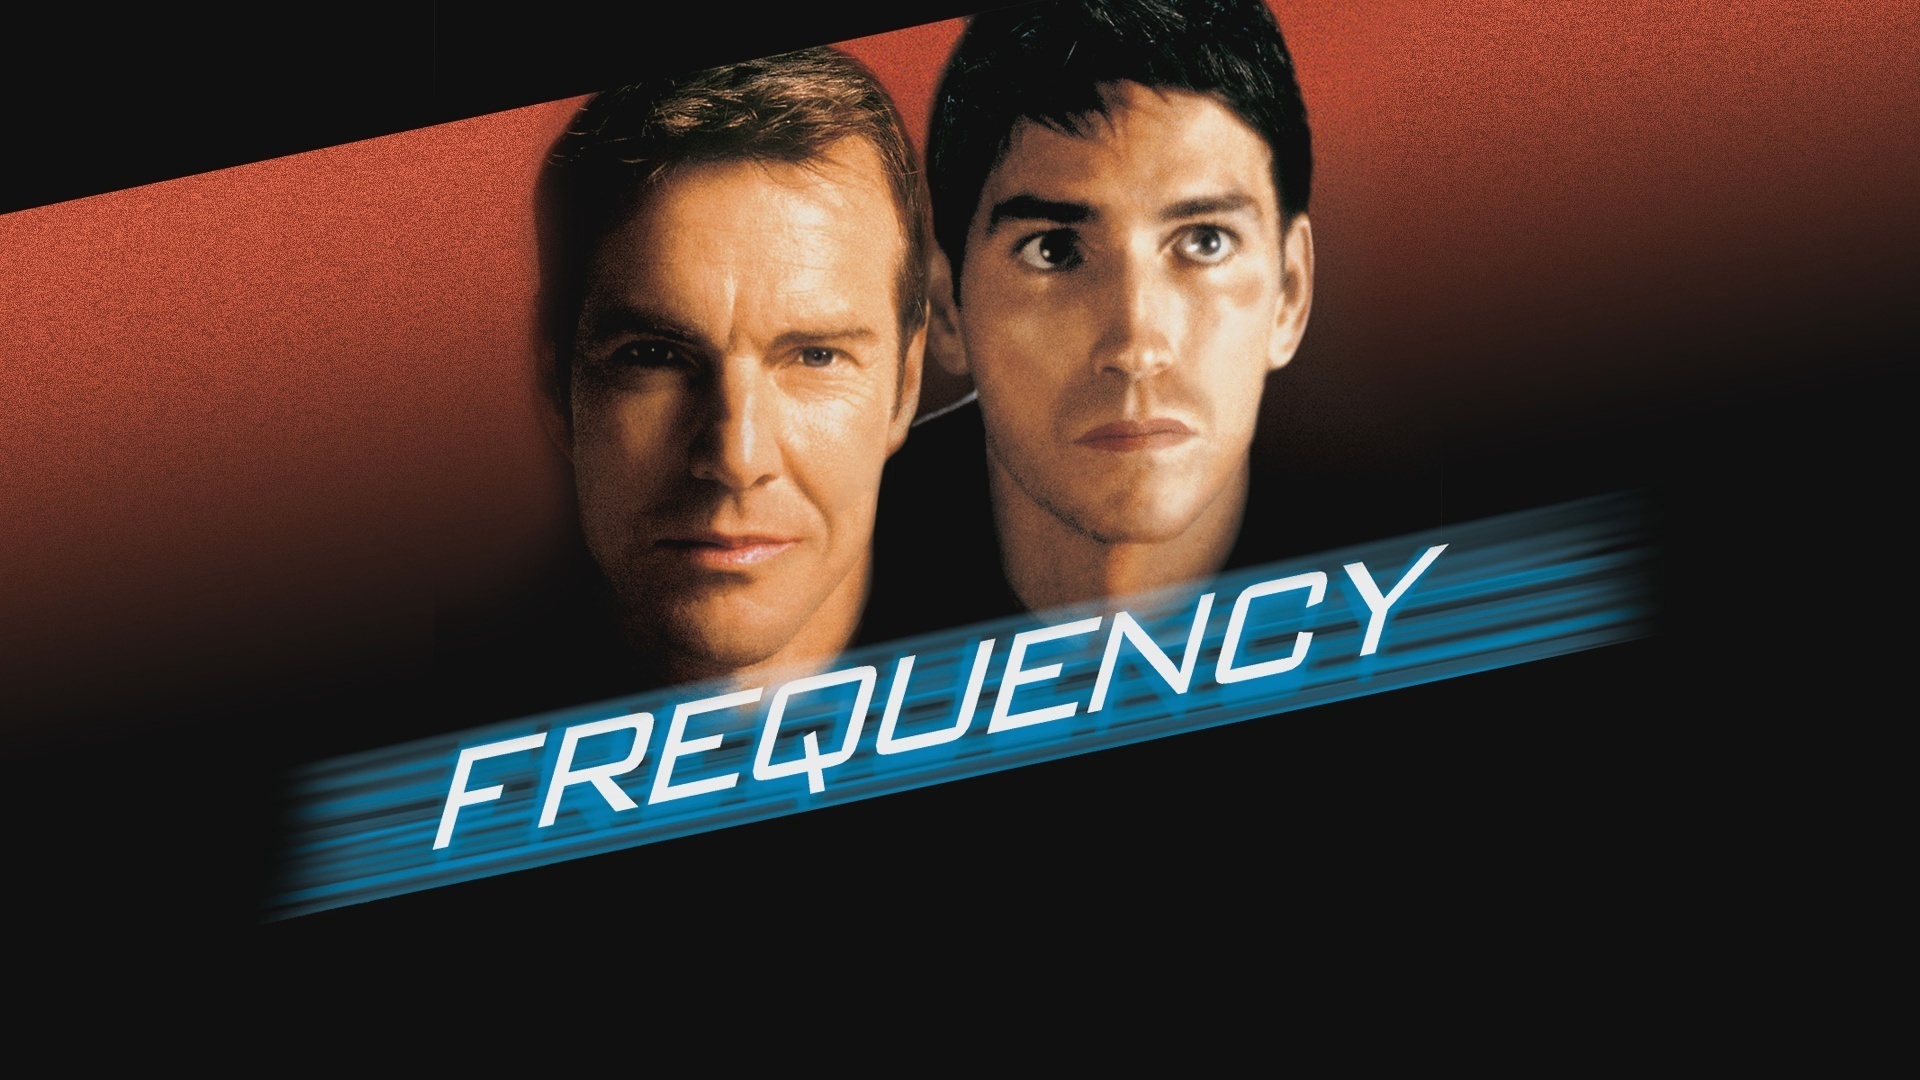 Frequency (Movie): Sci-fi drama, directed by Gregory Hoblit and written by Toby Emmerich. 1920x1080 Full HD Wallpaper.